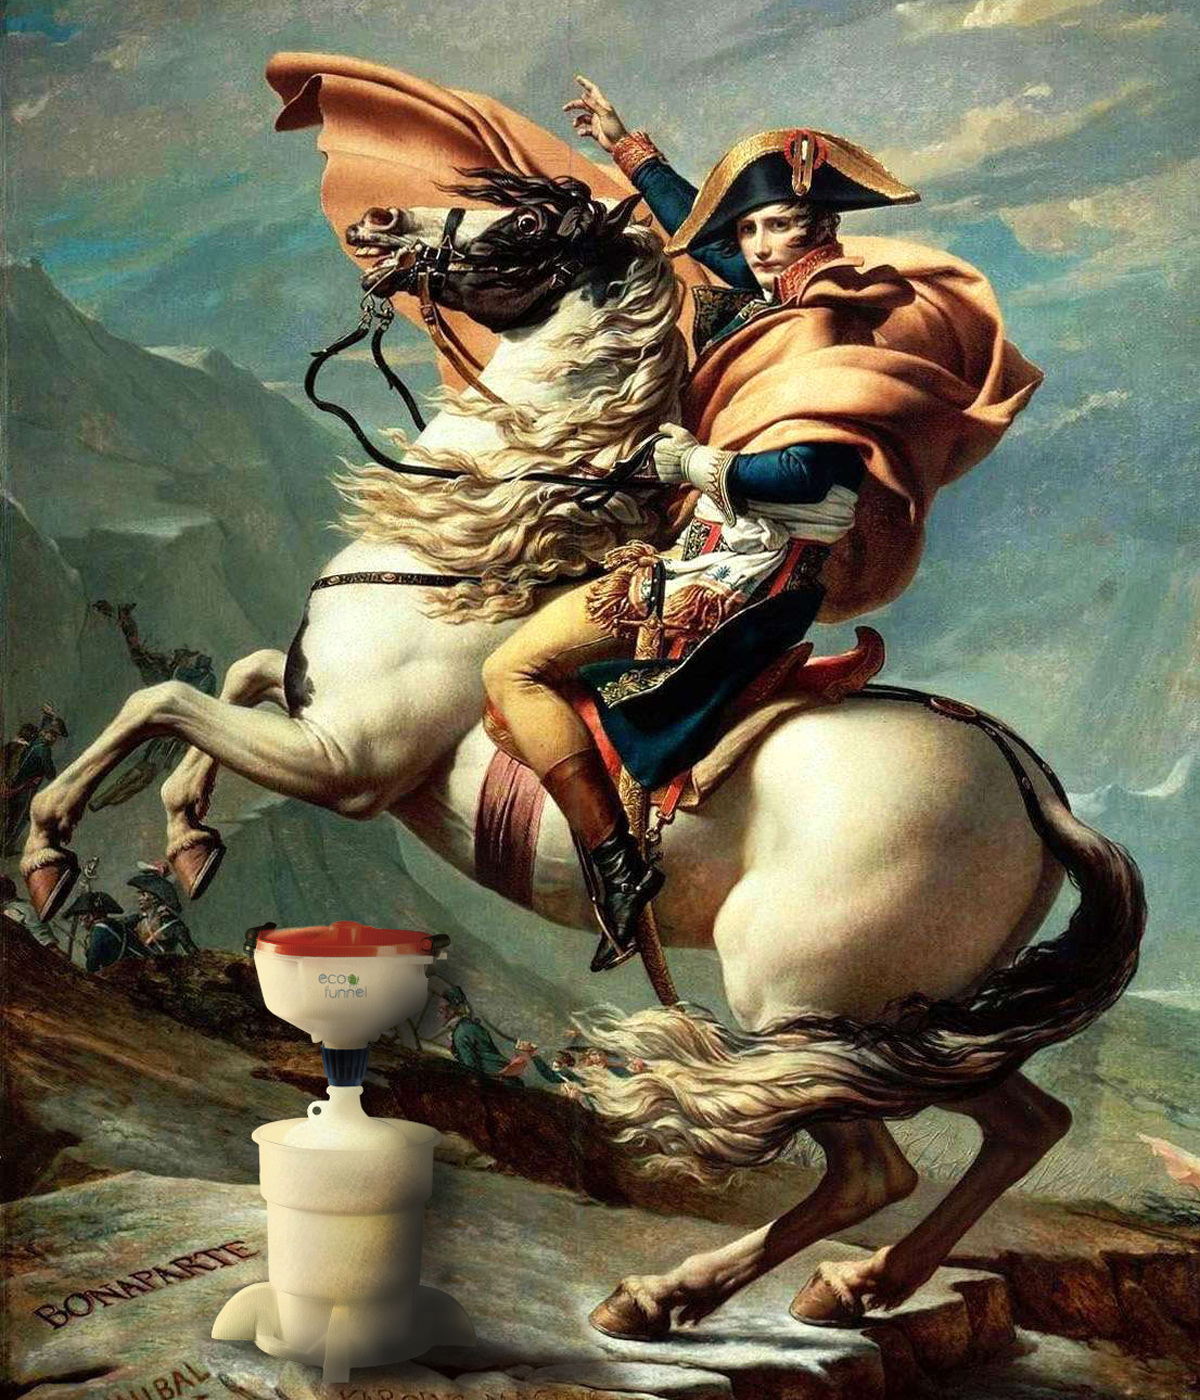 Napolean Crossing the Alps, Jacques-Louis David